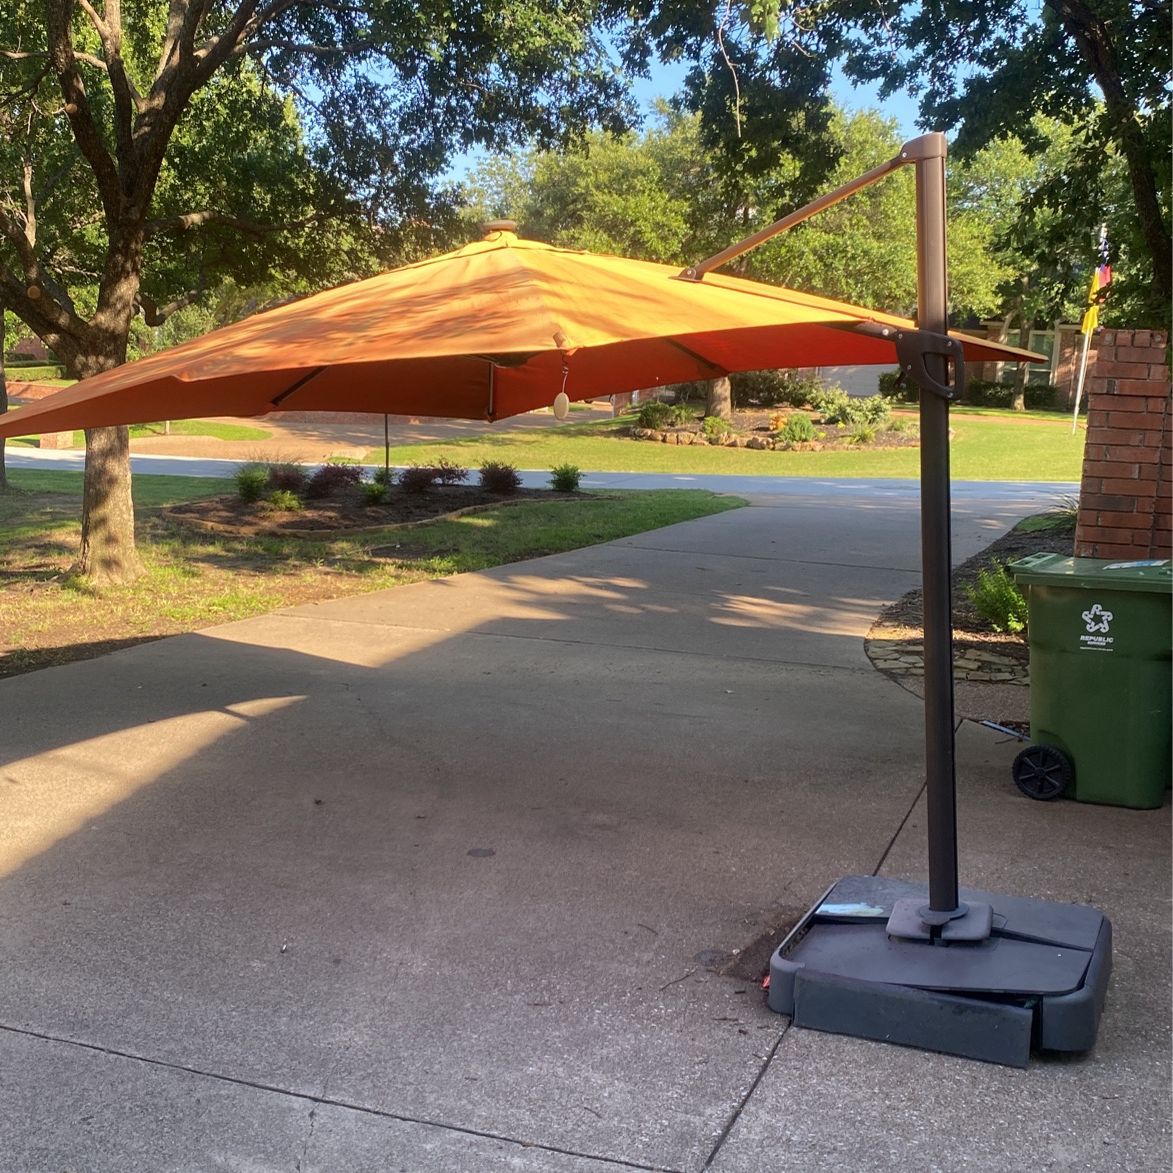 10ft X 10ft Umbrella - 2 Are Available @ $25 Each 